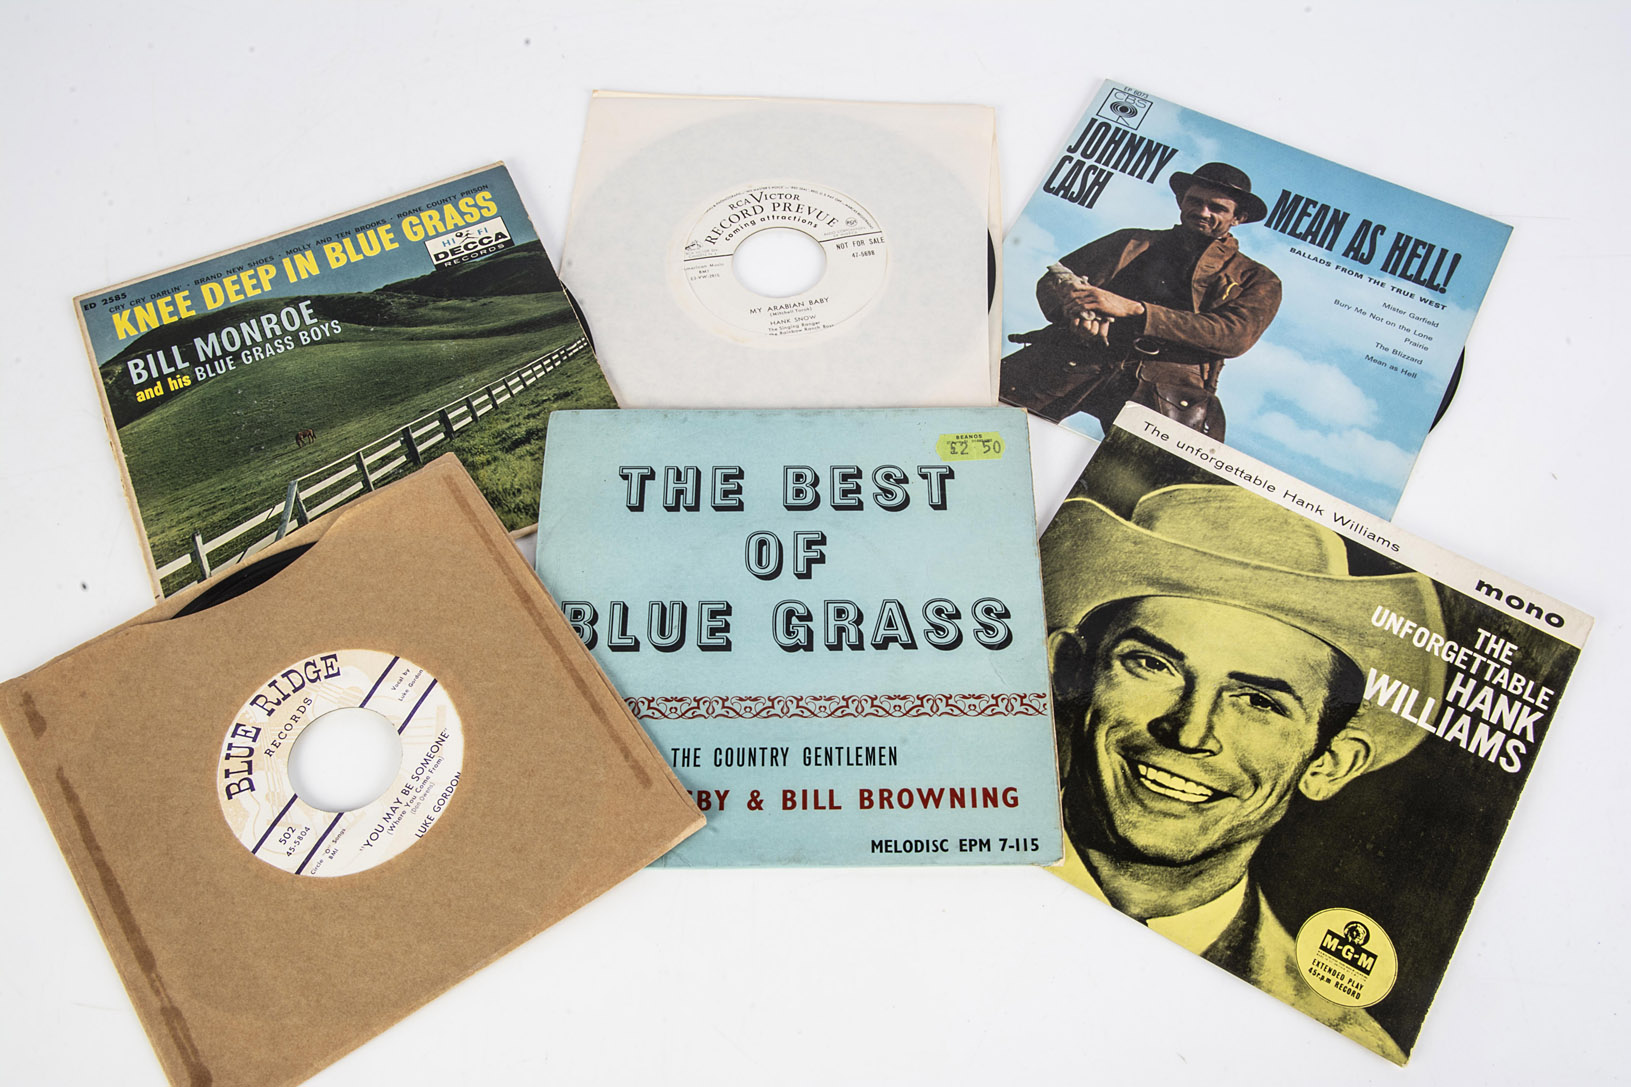 Bluegrass / American Folk 7" Singles and EPs, approximately two hundred EPs and 7" Singles of mainly